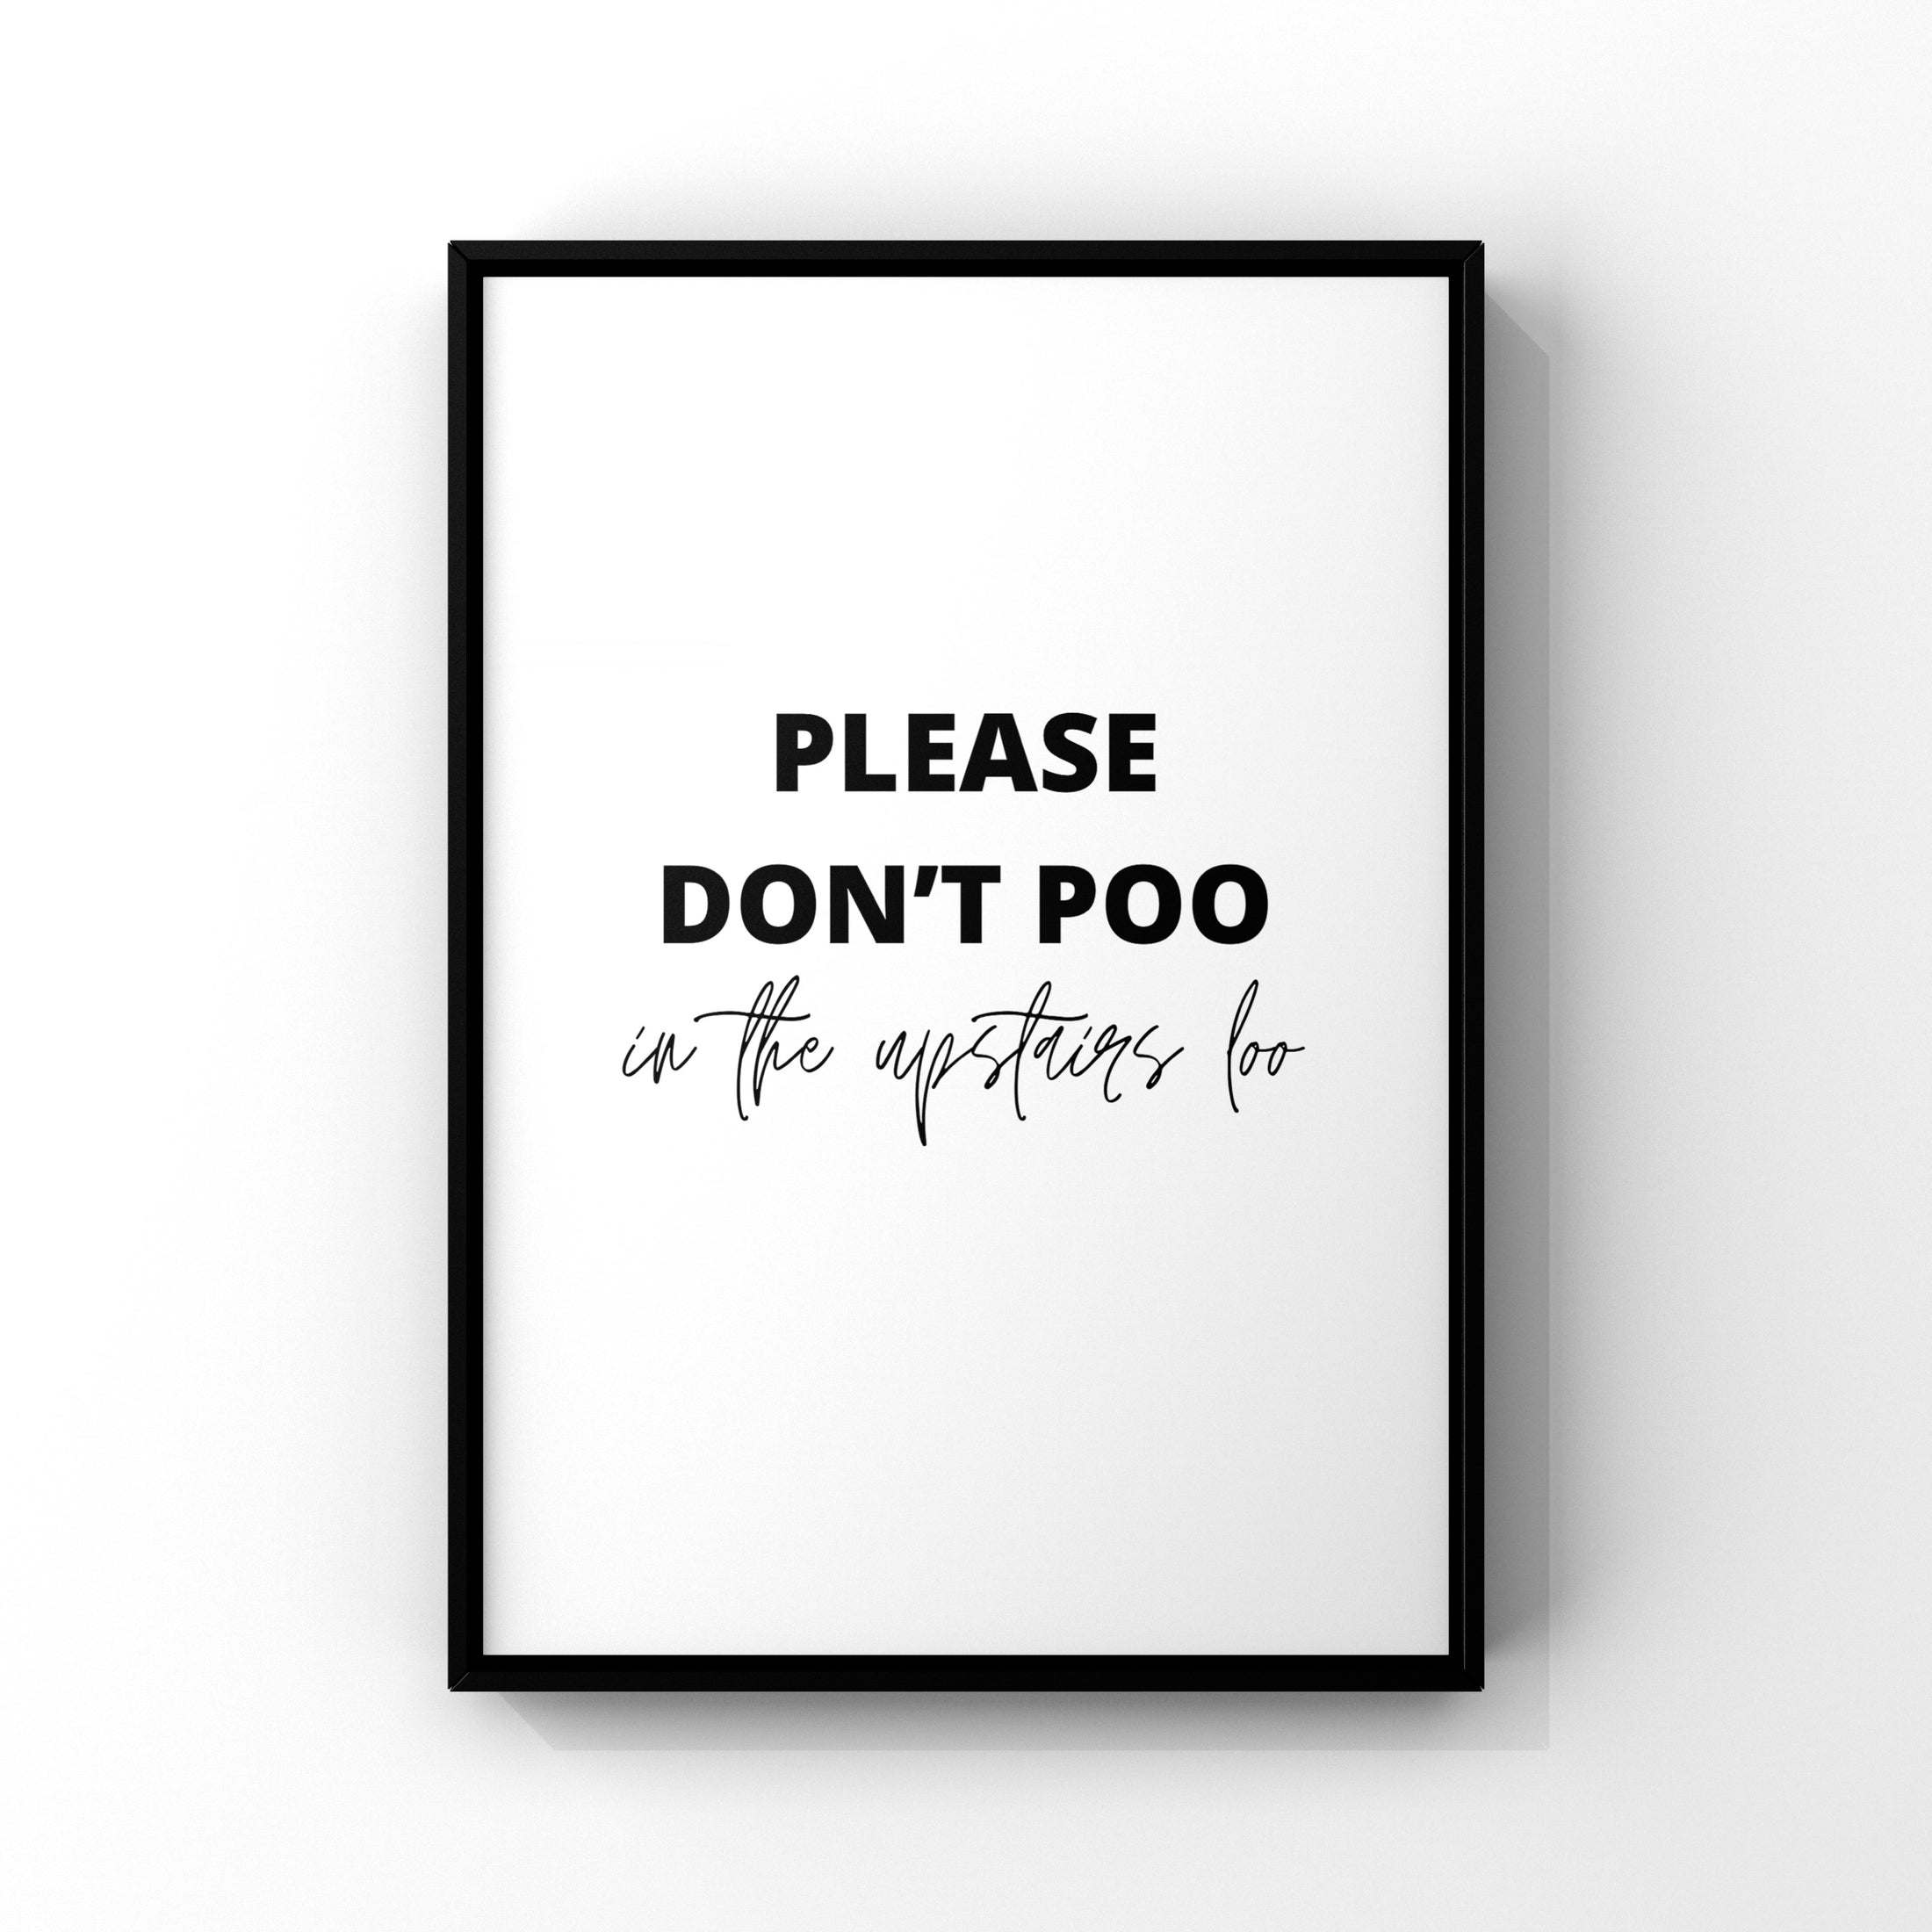 Please don’t poo in the downstairs loo